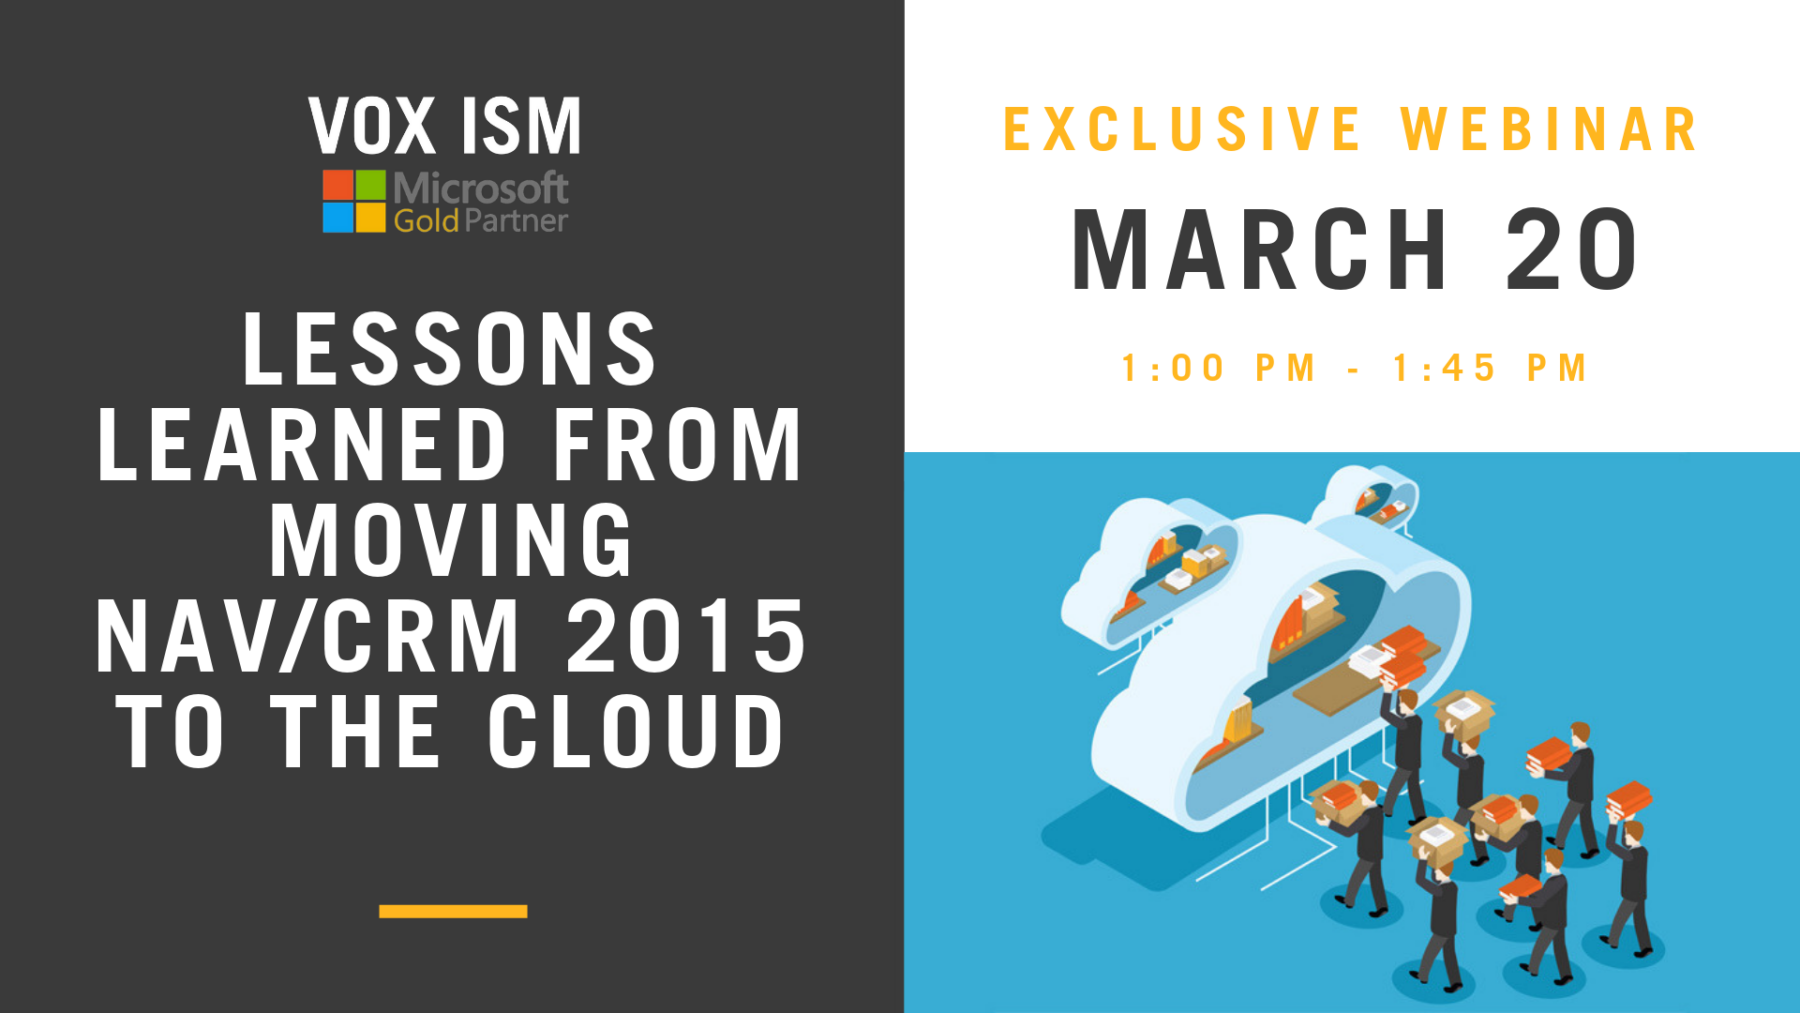 Lessons learned from moving NAV/CRM 2015 to the cloud – March 20 – Webinar